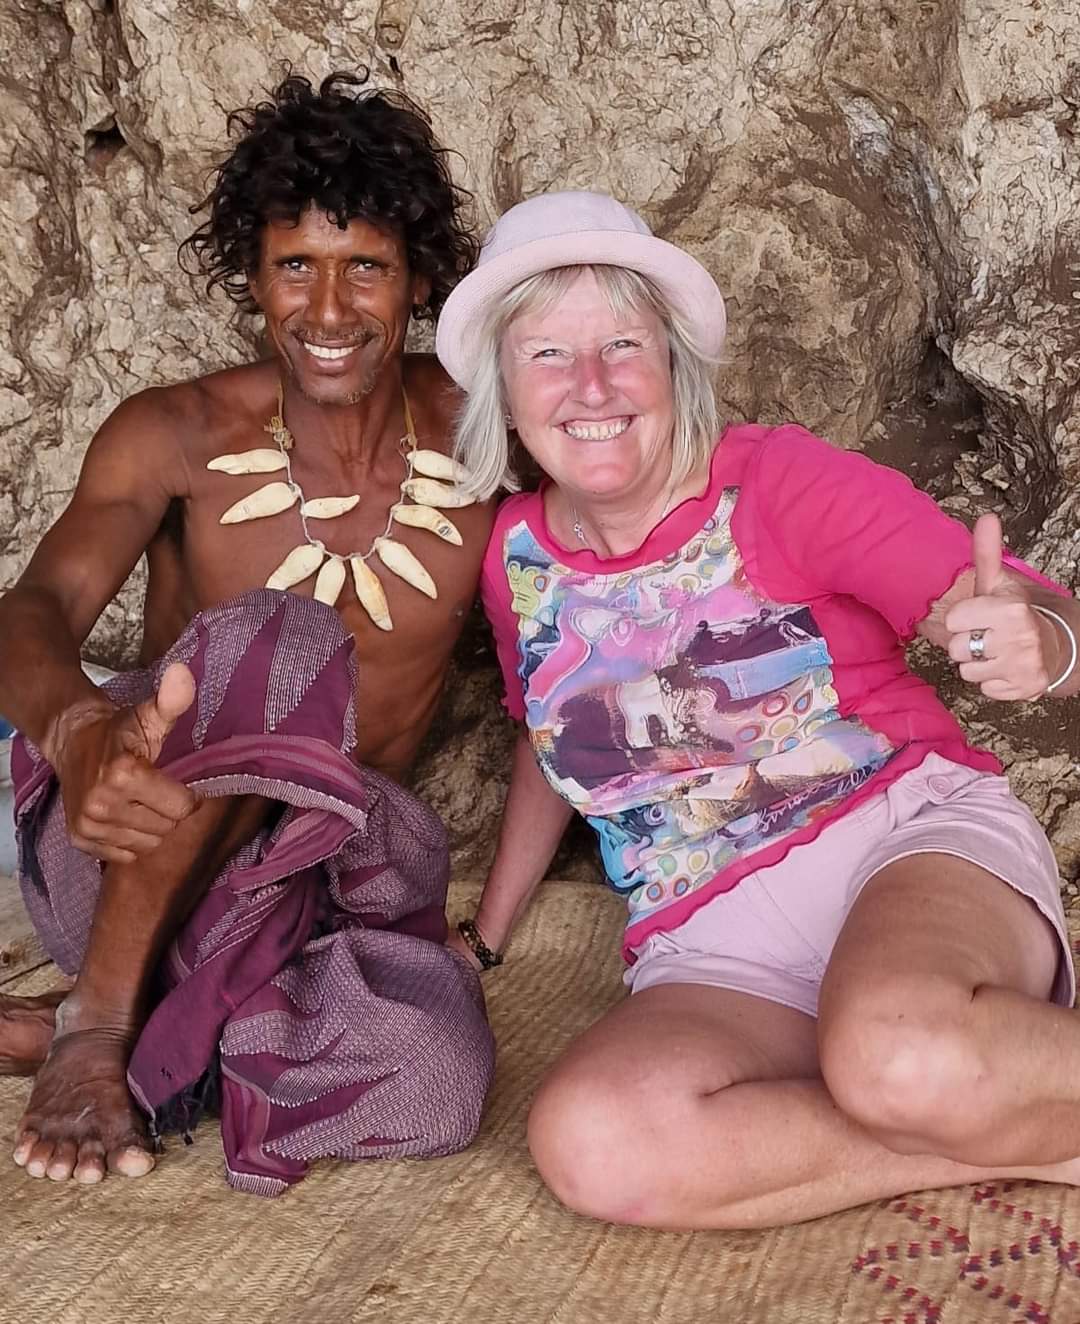 Me with the caveman in Socotra